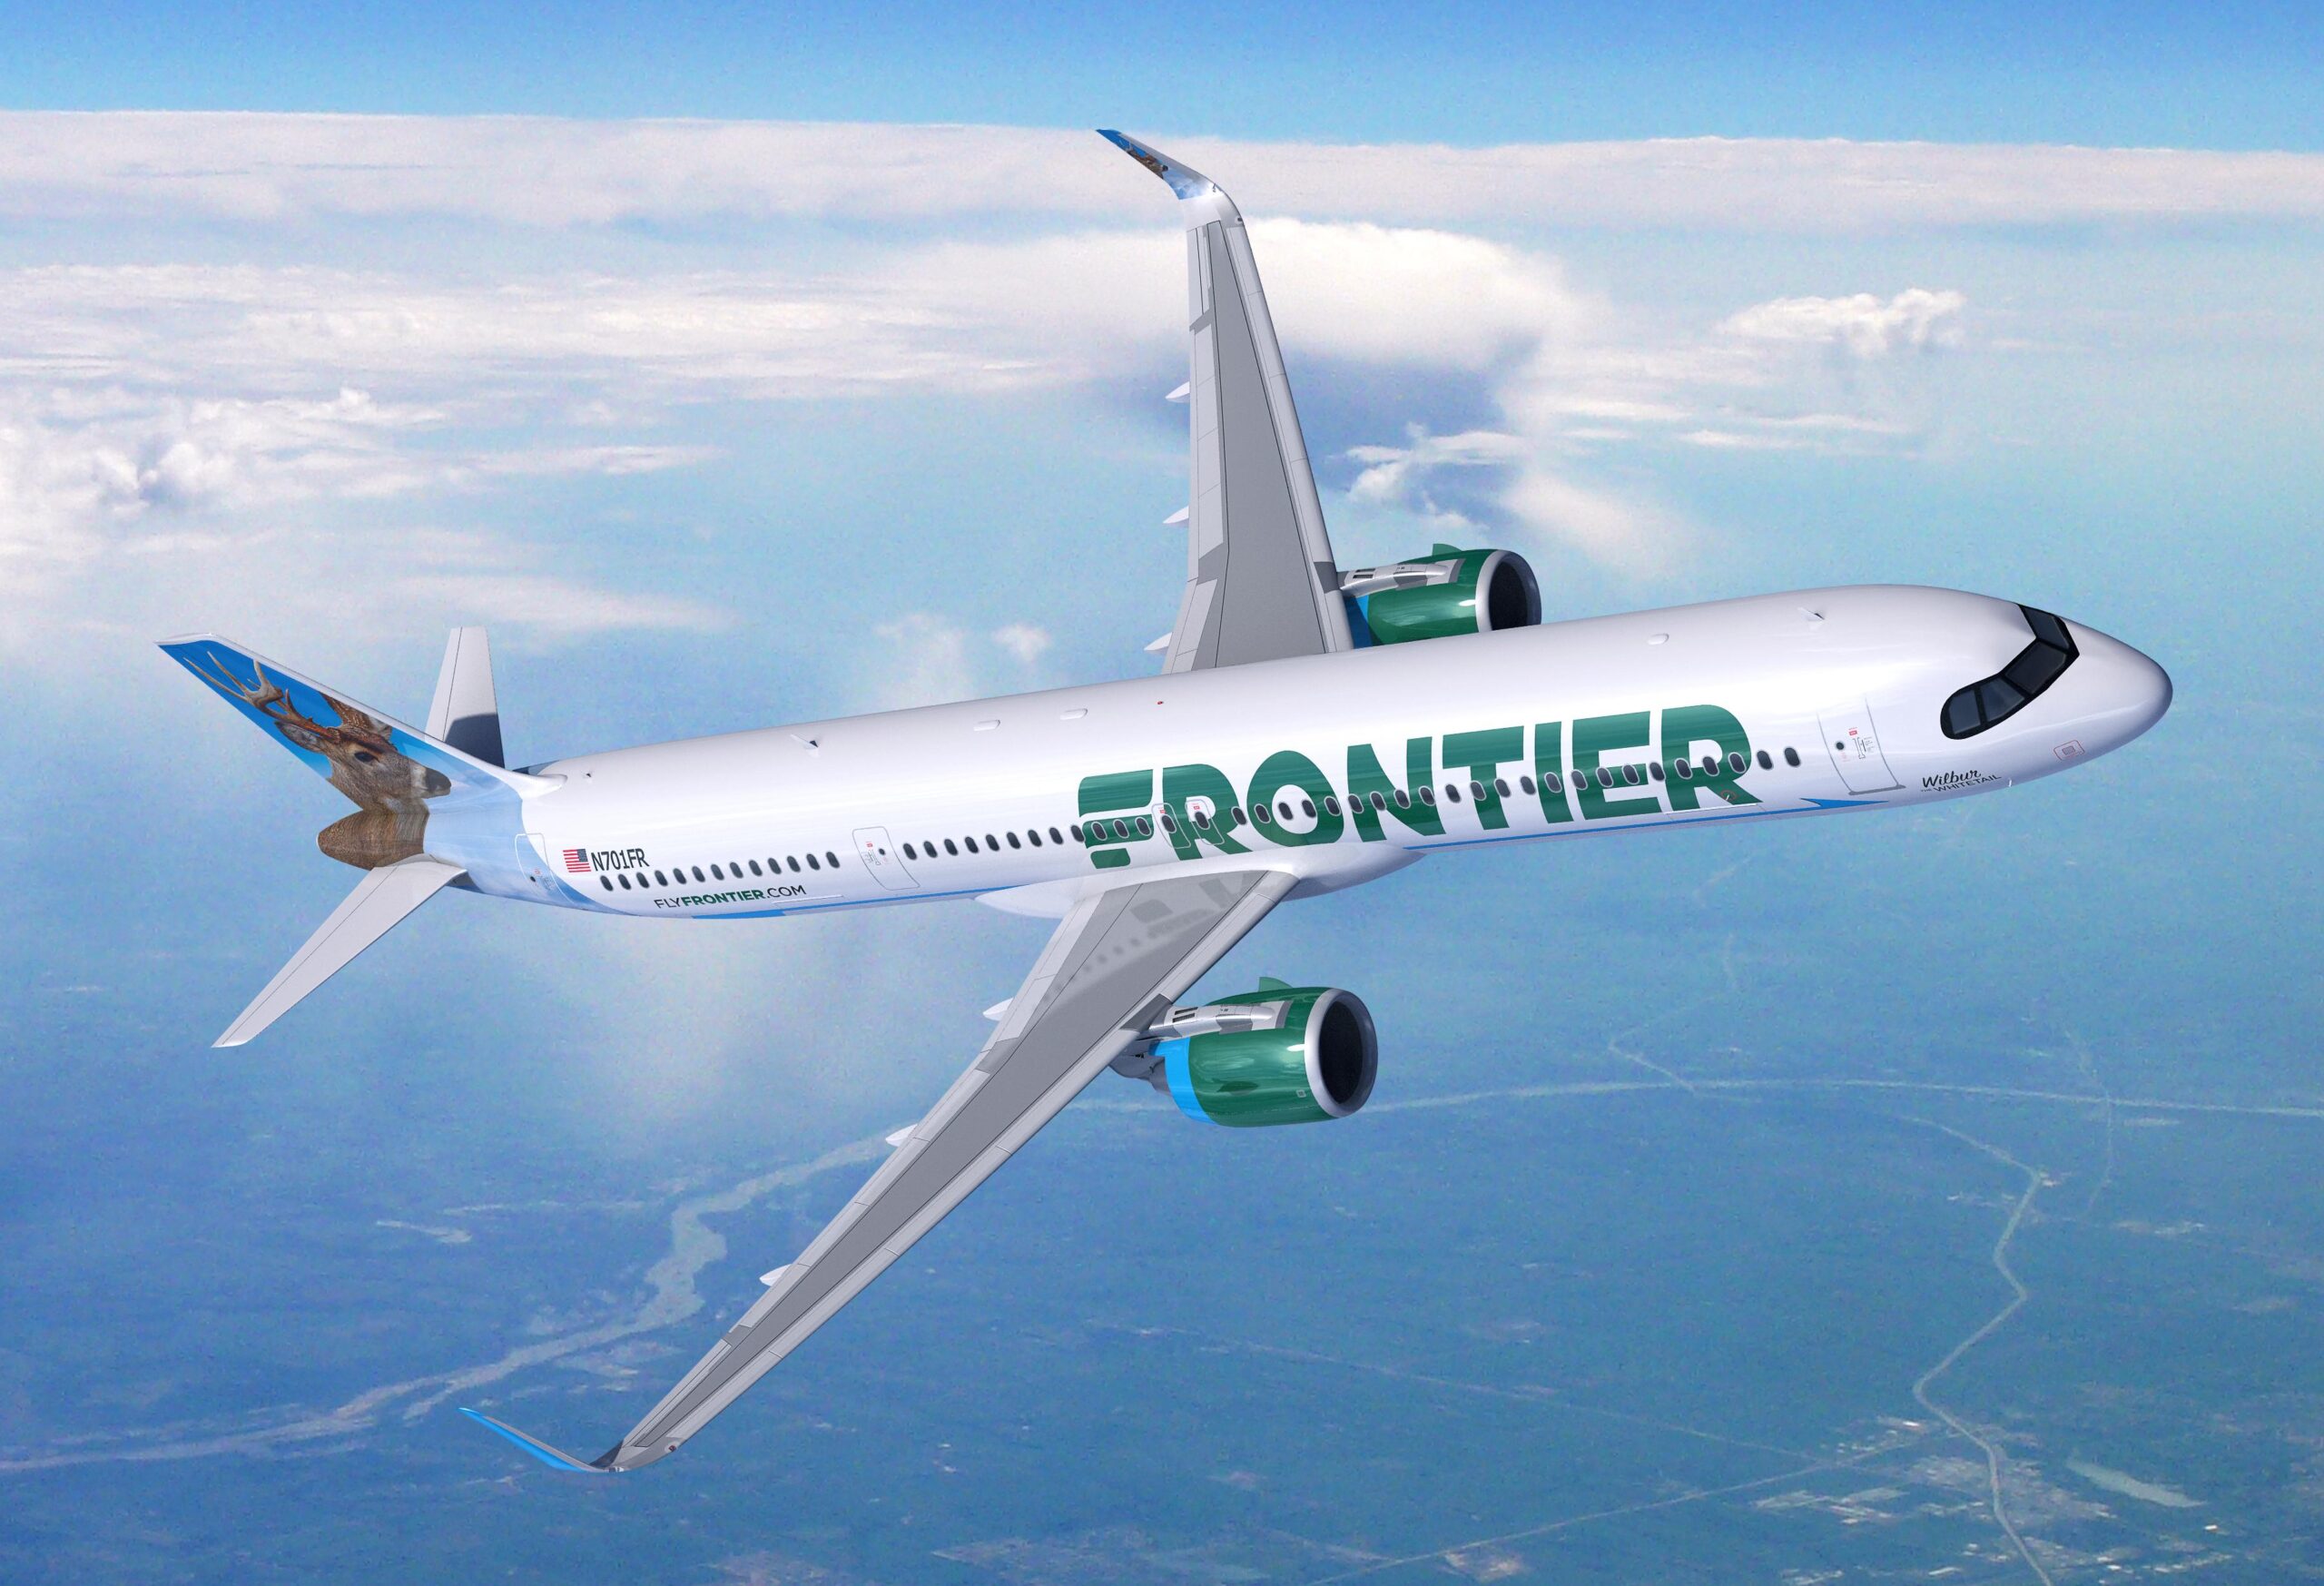 How do I select seats on Frontier Airlines